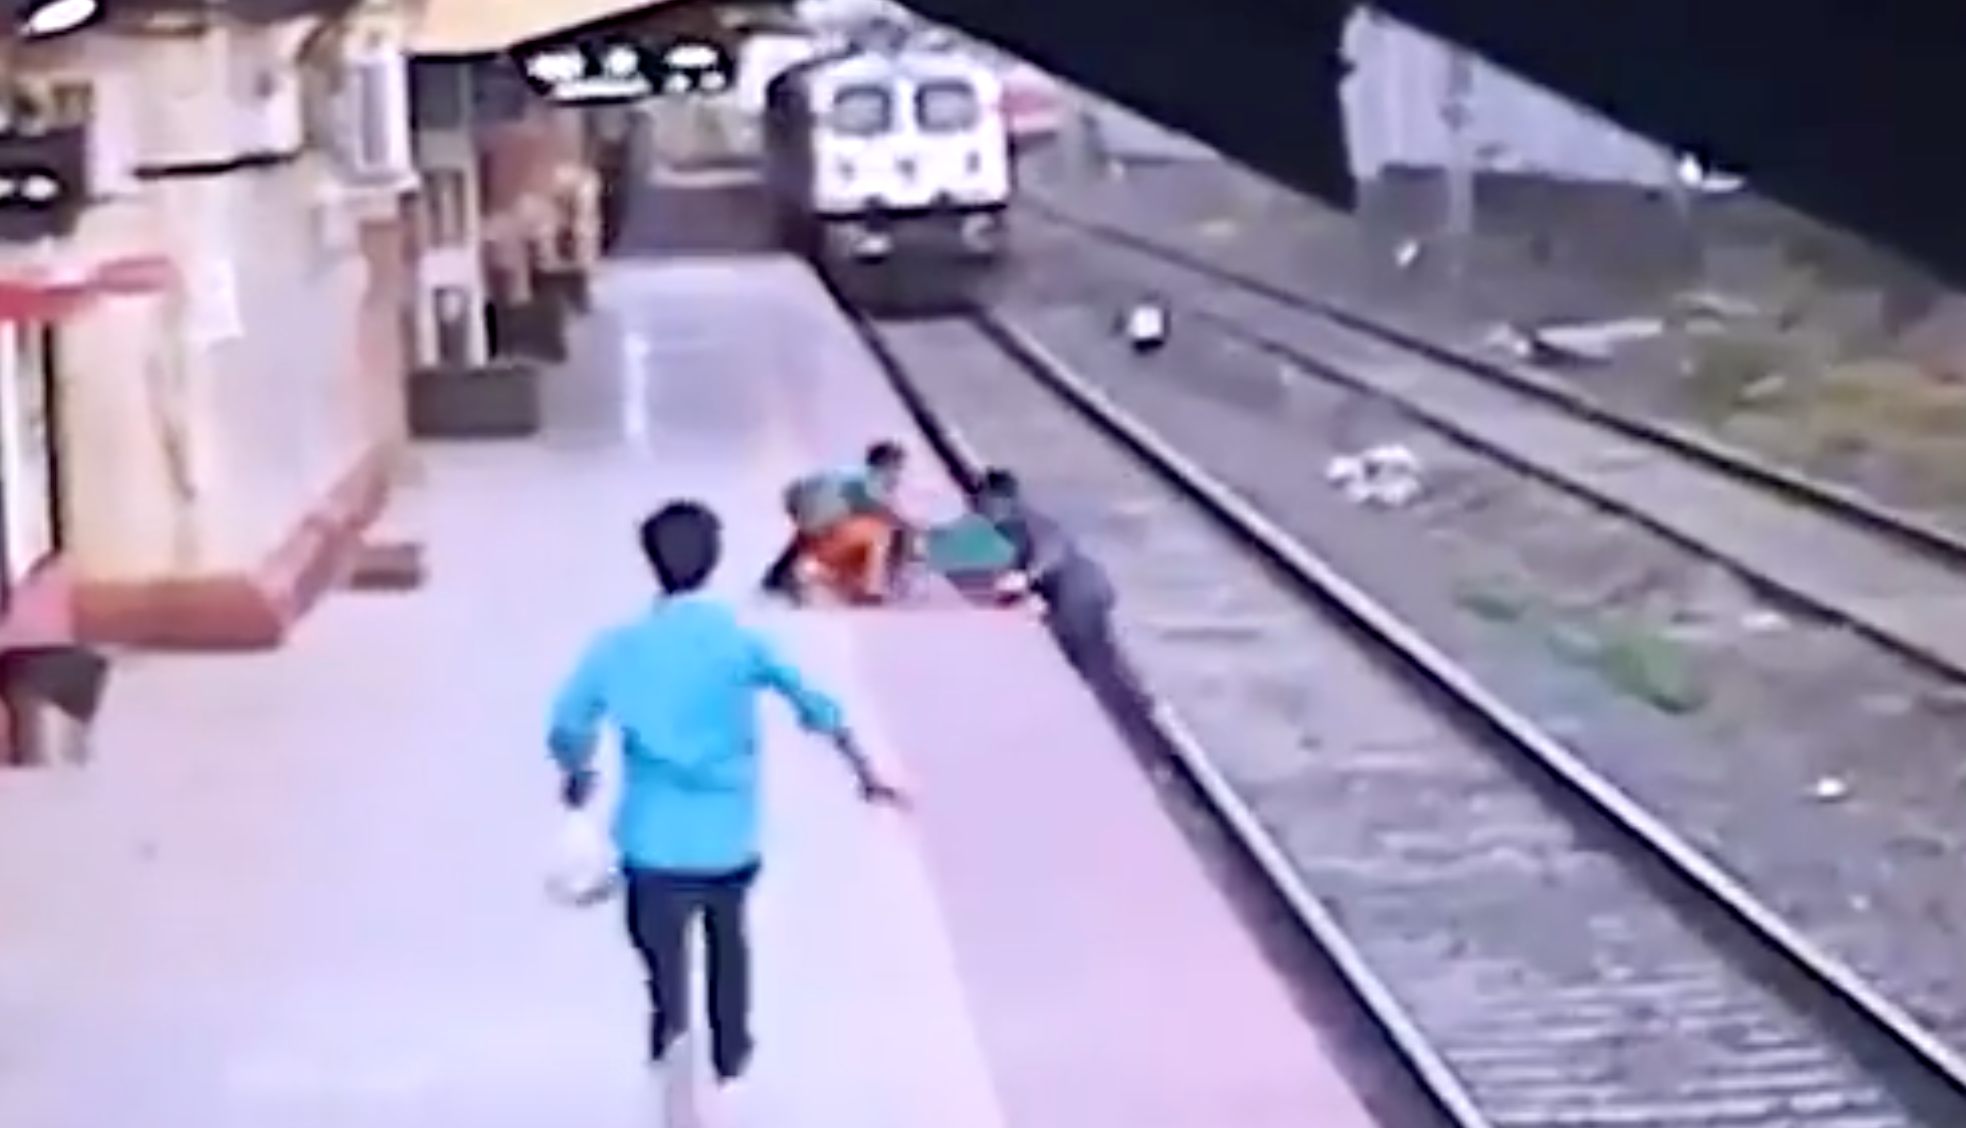 Meet Mayur Shelke, the Railways hero who rescued a child from a train in Mumbai